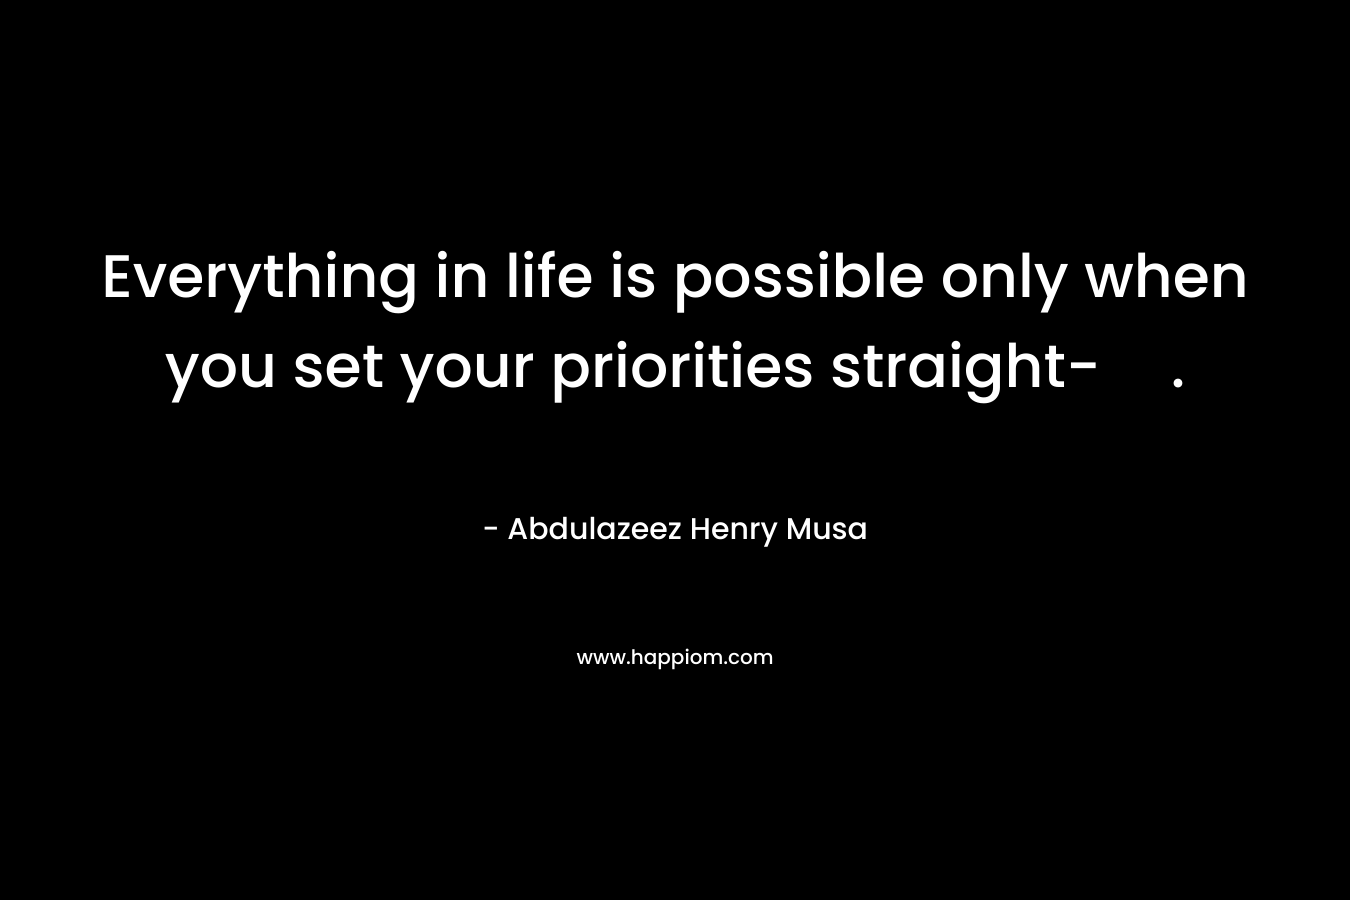 Everything in life is possible only when you set your priorities straight-.